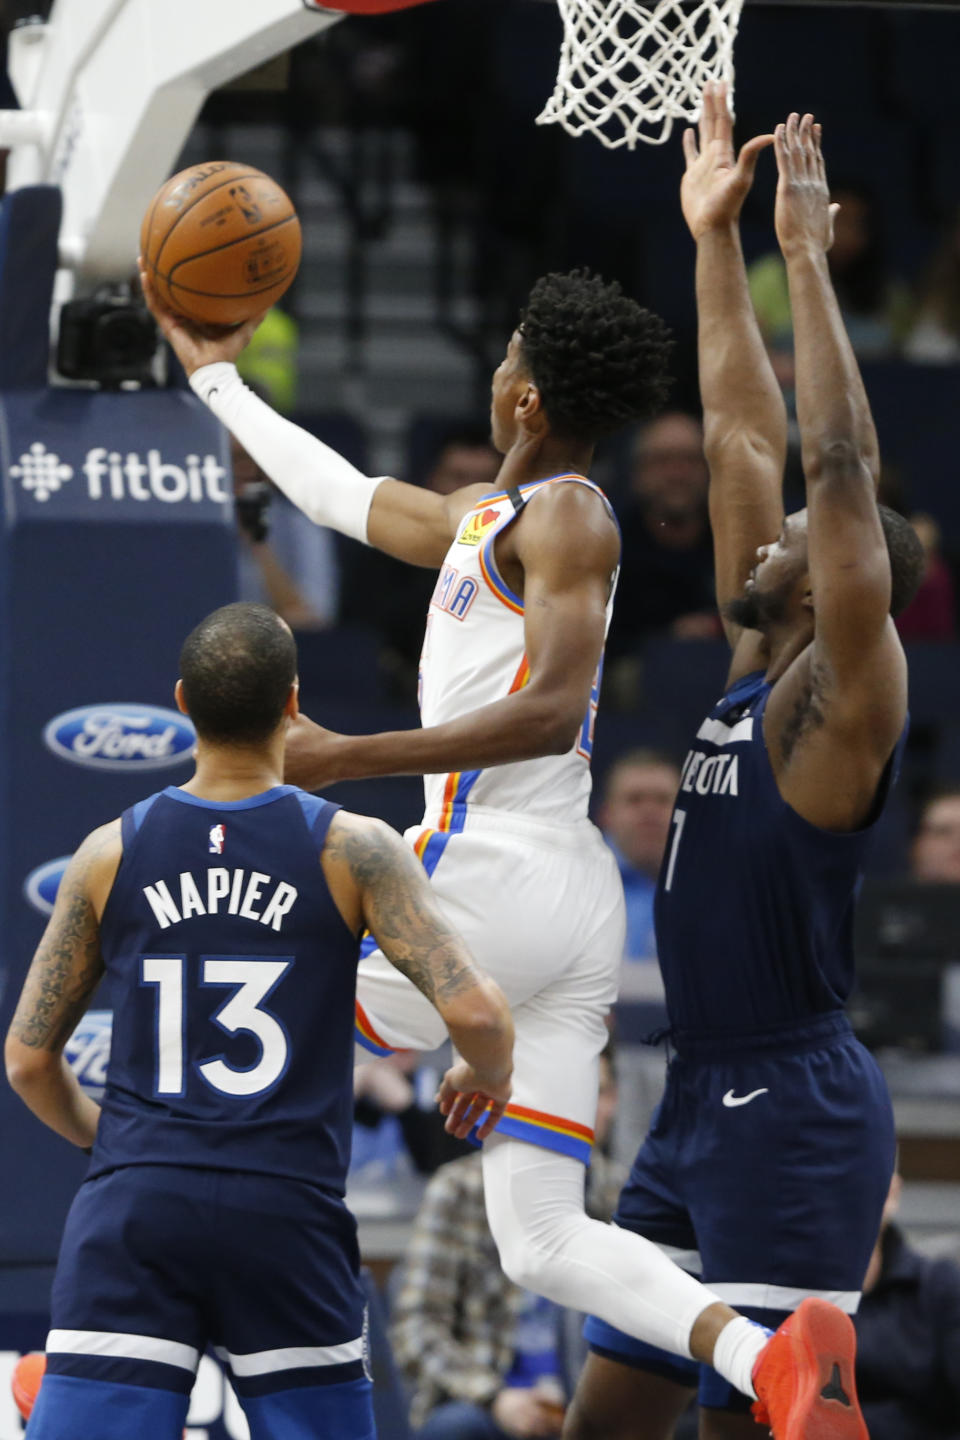 Oklahoma City Thunder's Shai Gilgeous-Alexander, center, of Canada, lays up a shot as Shabazz Napier, left, and Minnesota Timberwolves' Noah Vonleh defend in the first half of an NBA basketball game Monday, Jan. 13, 2020, in Minneapolis. (AP Photo/Jim Mone)